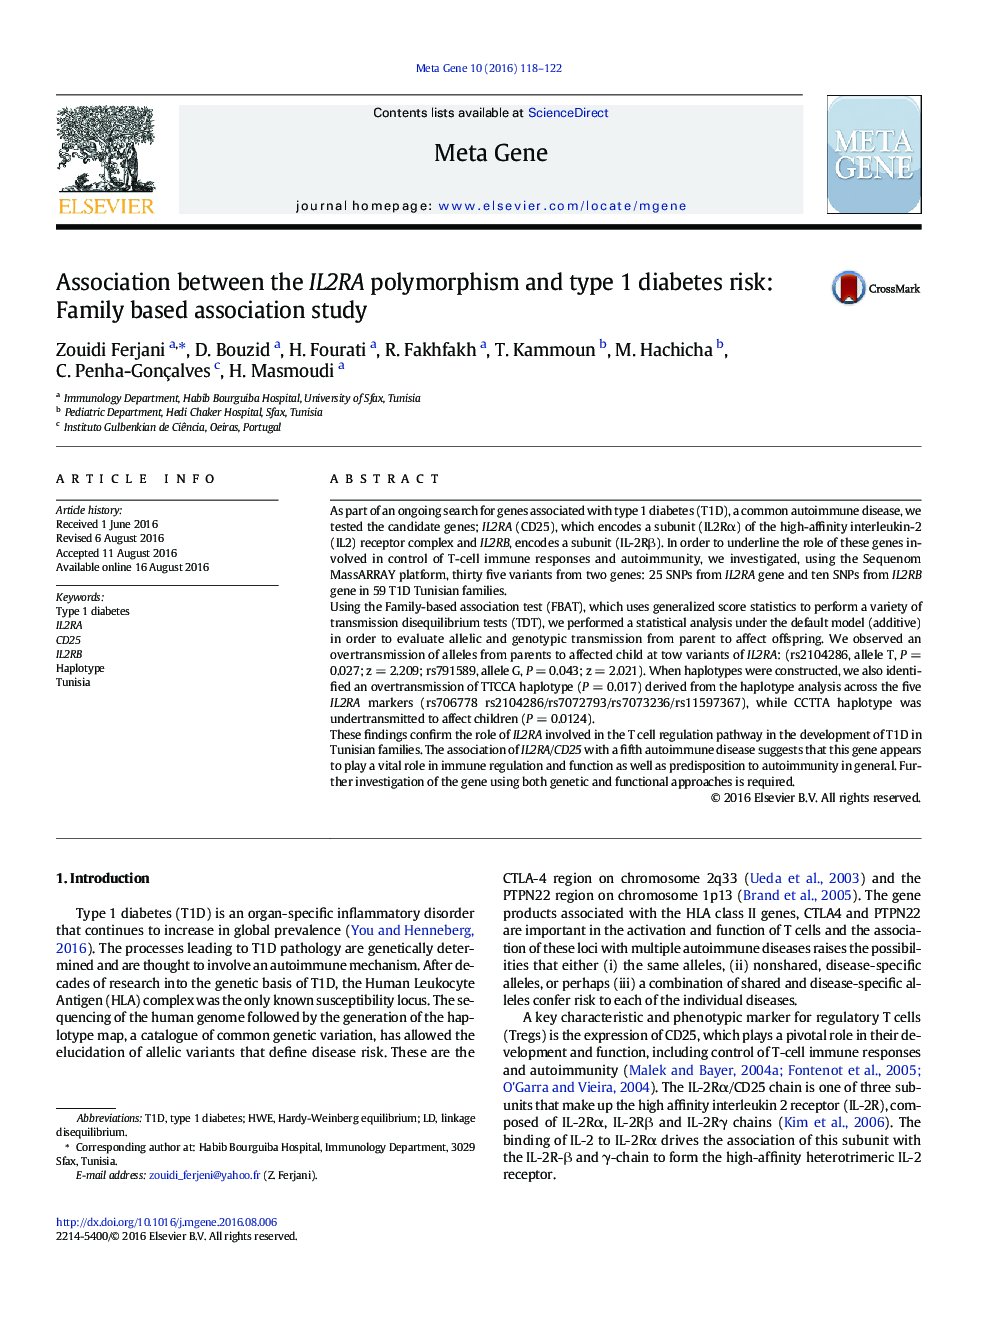 Association between the IL2RA polymorphism and type 1 diabetes risk: Family based association study